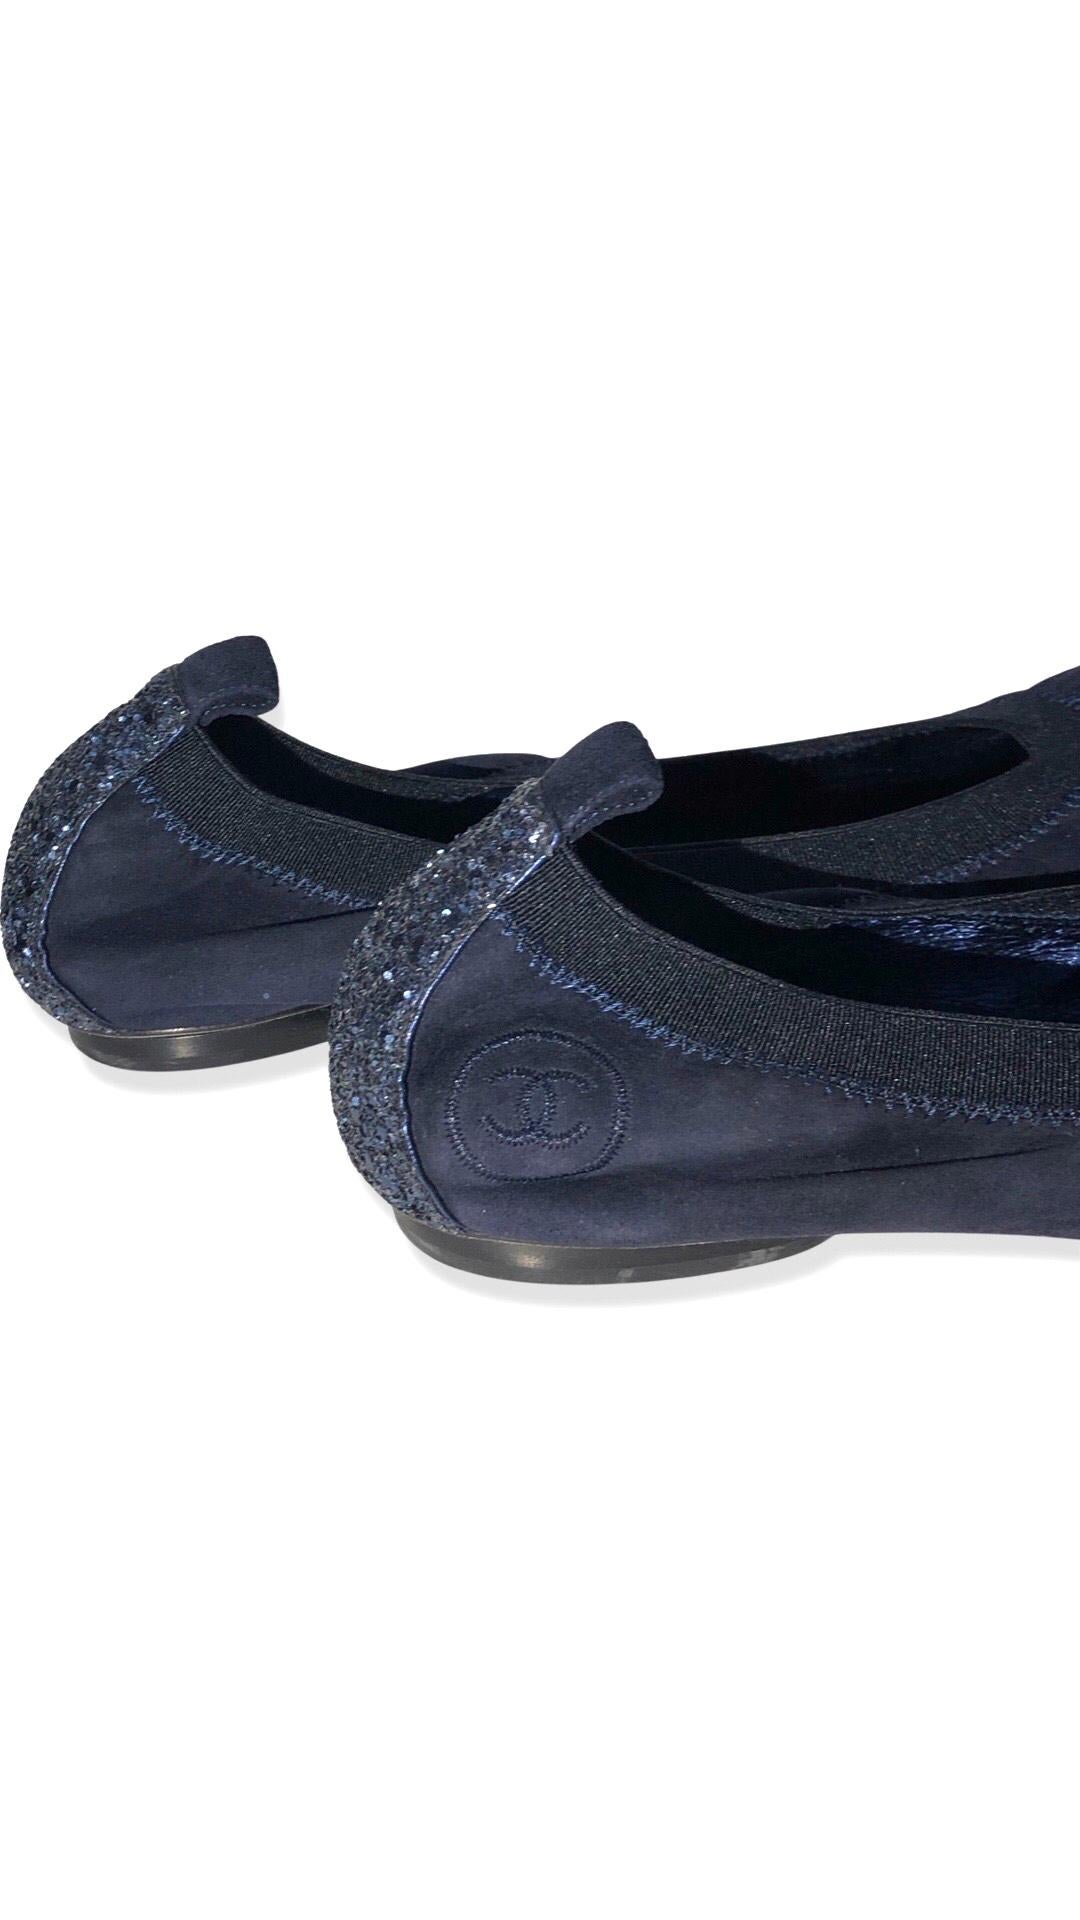 Unworn Chanel Navy Blue Suede Metallic Sequins Stretch  Ballerina Flats  In New Condition For Sale In Sheung Wan, HK